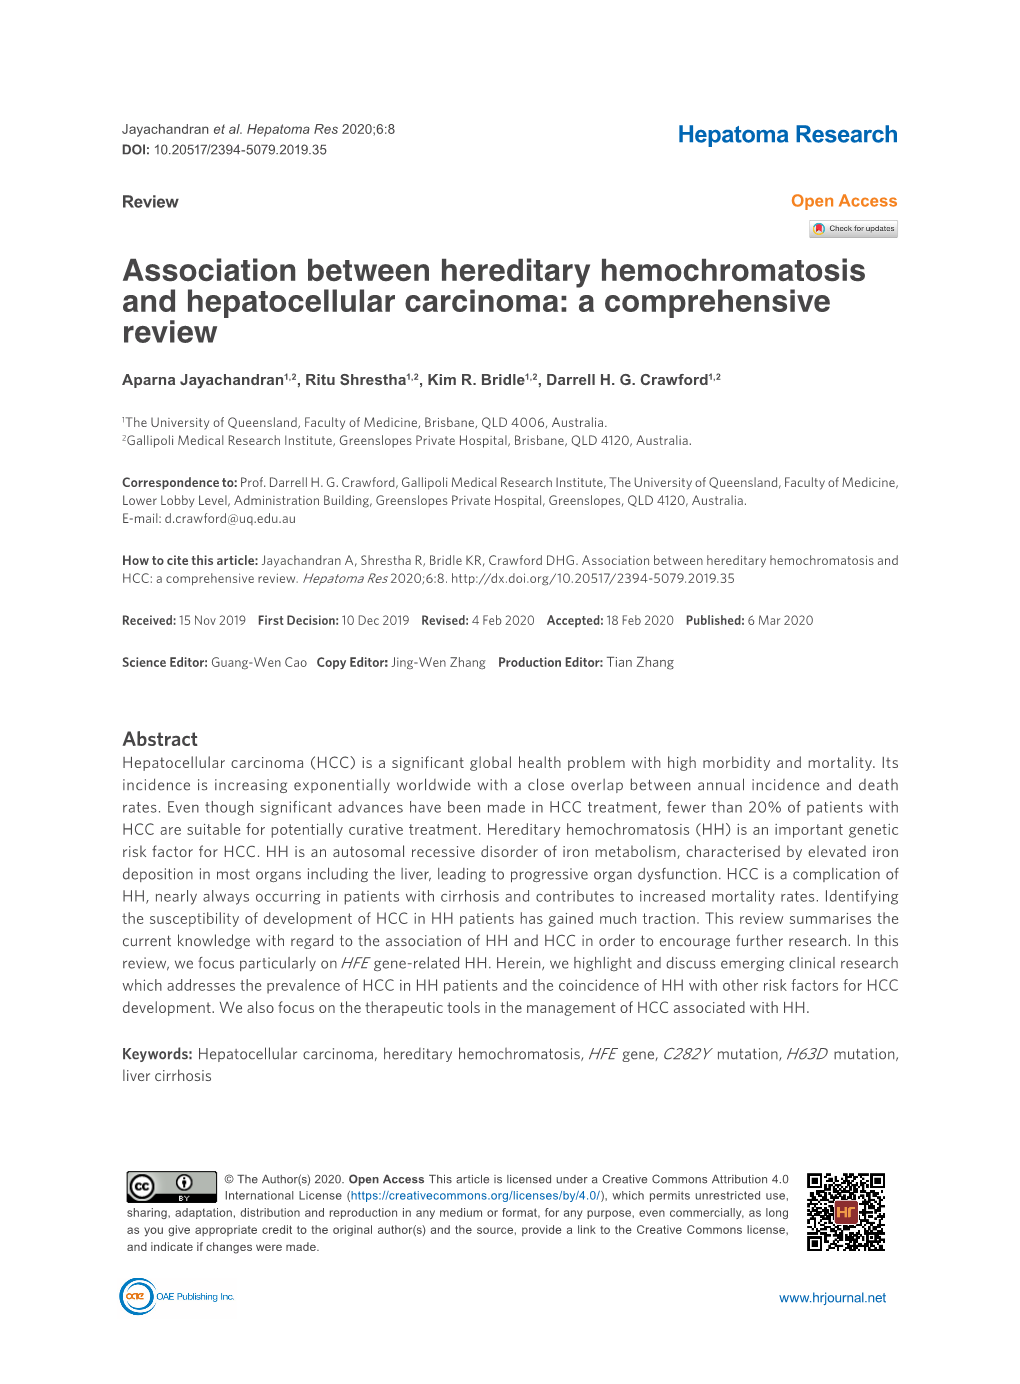 Association Between Hereditary Hemochromatosis and Hepatocellular Carcinoma: a Comprehensive Review